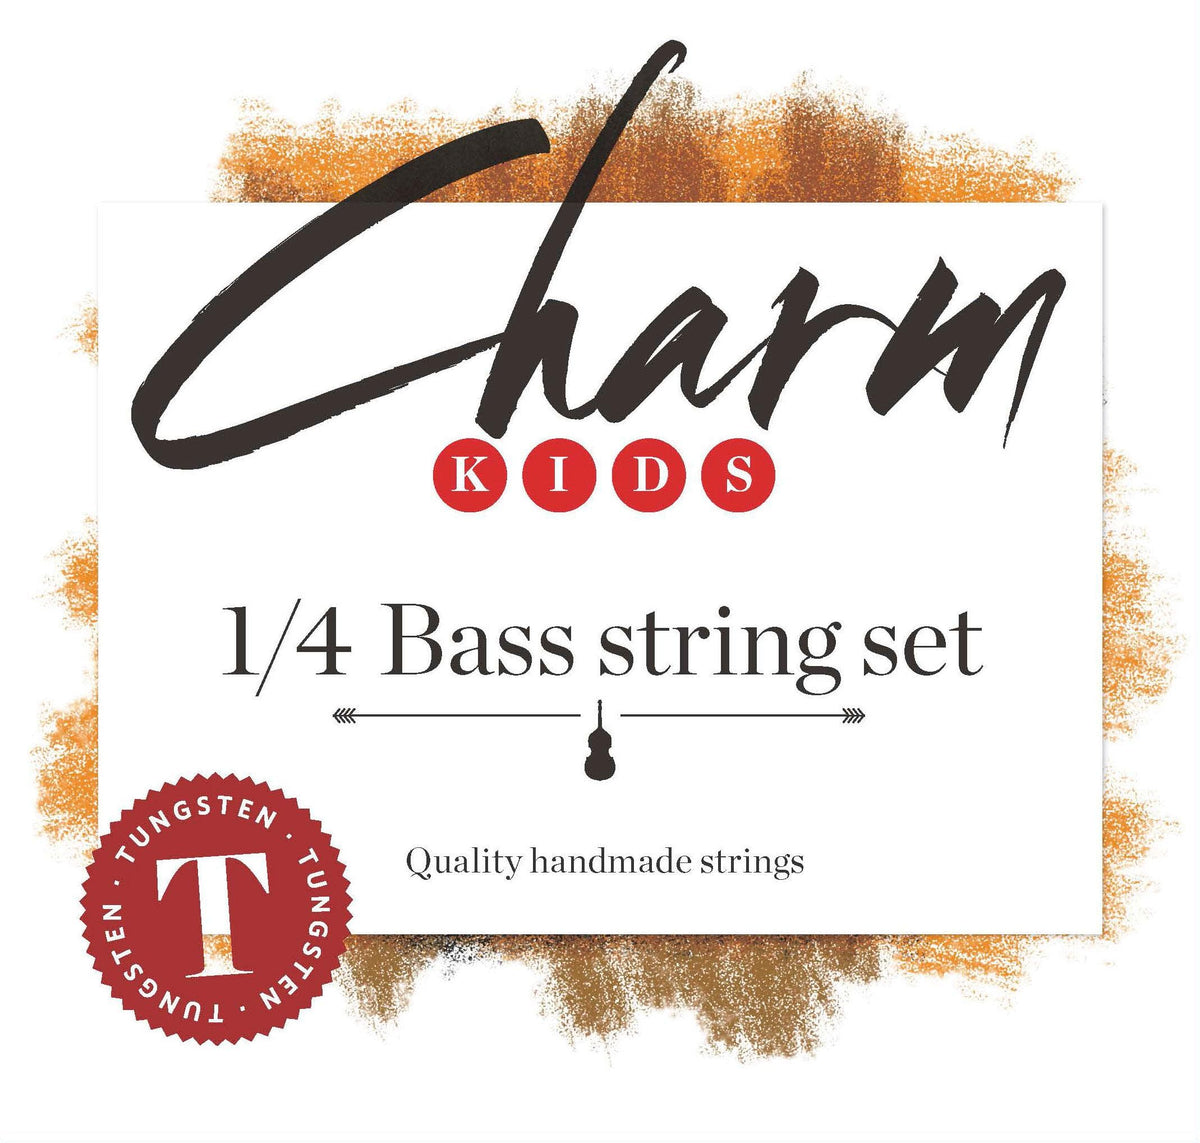 Charm Bass Orchestra String Set 1/4 Size